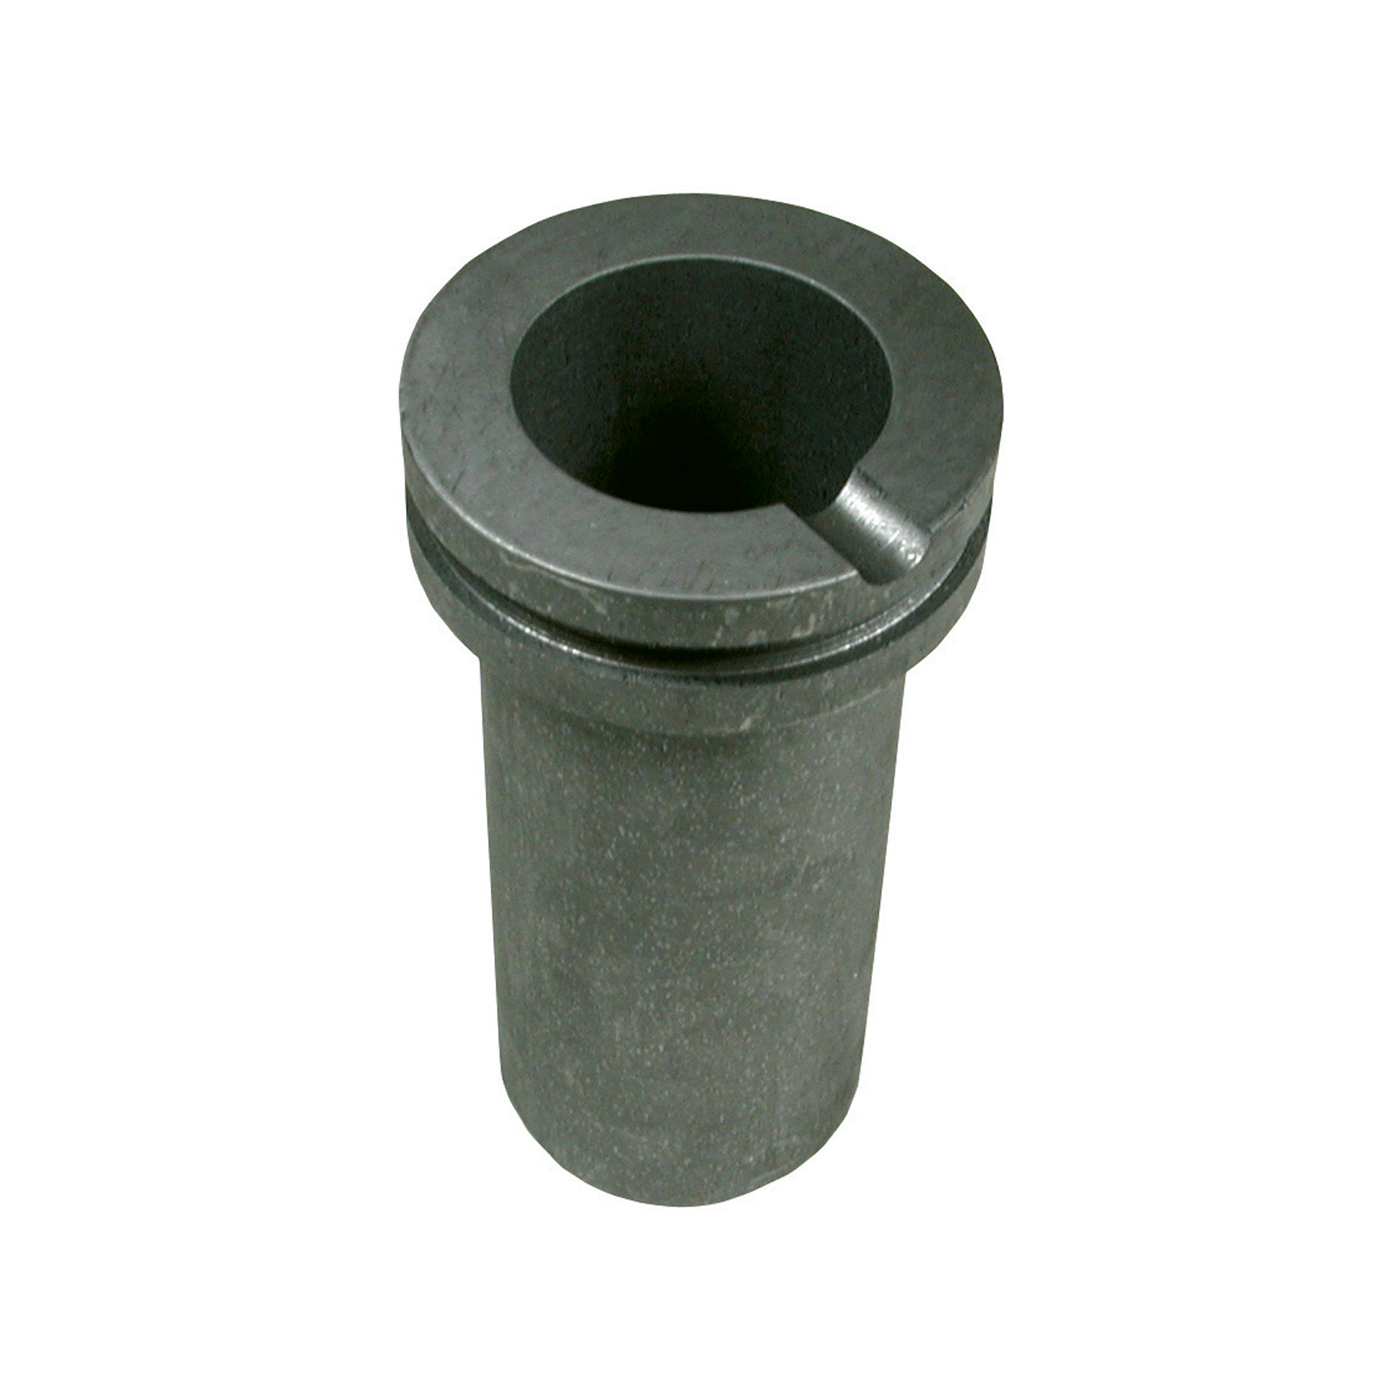 Graphite Crucible, for Melting Furnace 1 kg Gold - 1 piece